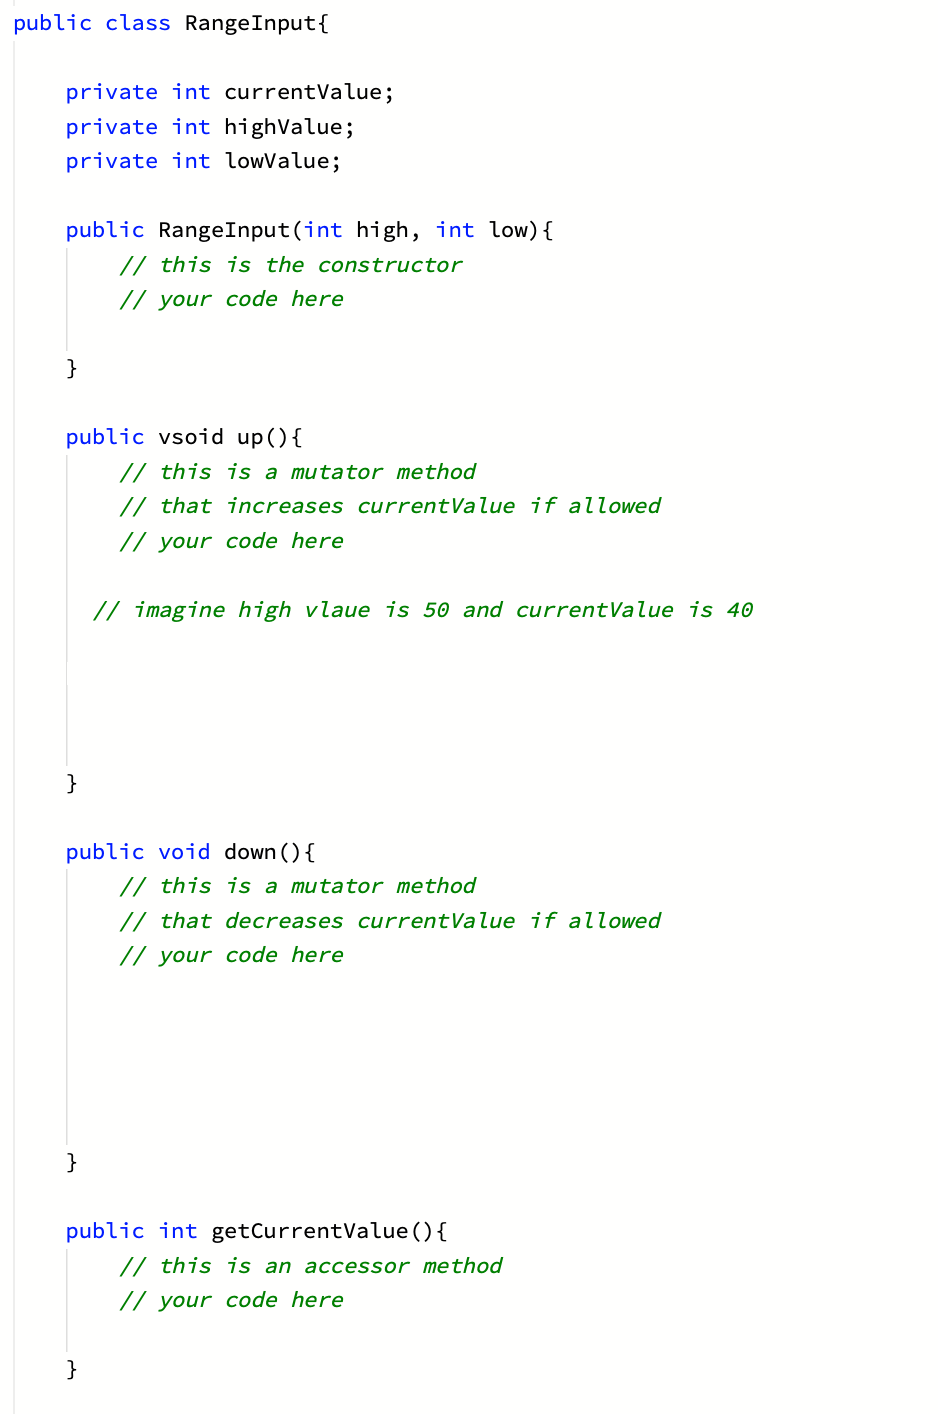 public class RangeInput{
private int currentValue;
private int highValue;
private int lowValue;
public RangeInput(int high, int low){
// this is the constructor
// your code here
}
public vsoid up(){
// this is a mutator method
// that increases currentValue if allowed
// your code here
// imagine high vlaue is 50 and currentValue is 40
}
public void down (){
// this is a mutator method
// that decreases currentValue if allowed
// your code here
}
public int getCurrentValue (){
// this is an accessor method
// your code here
}
